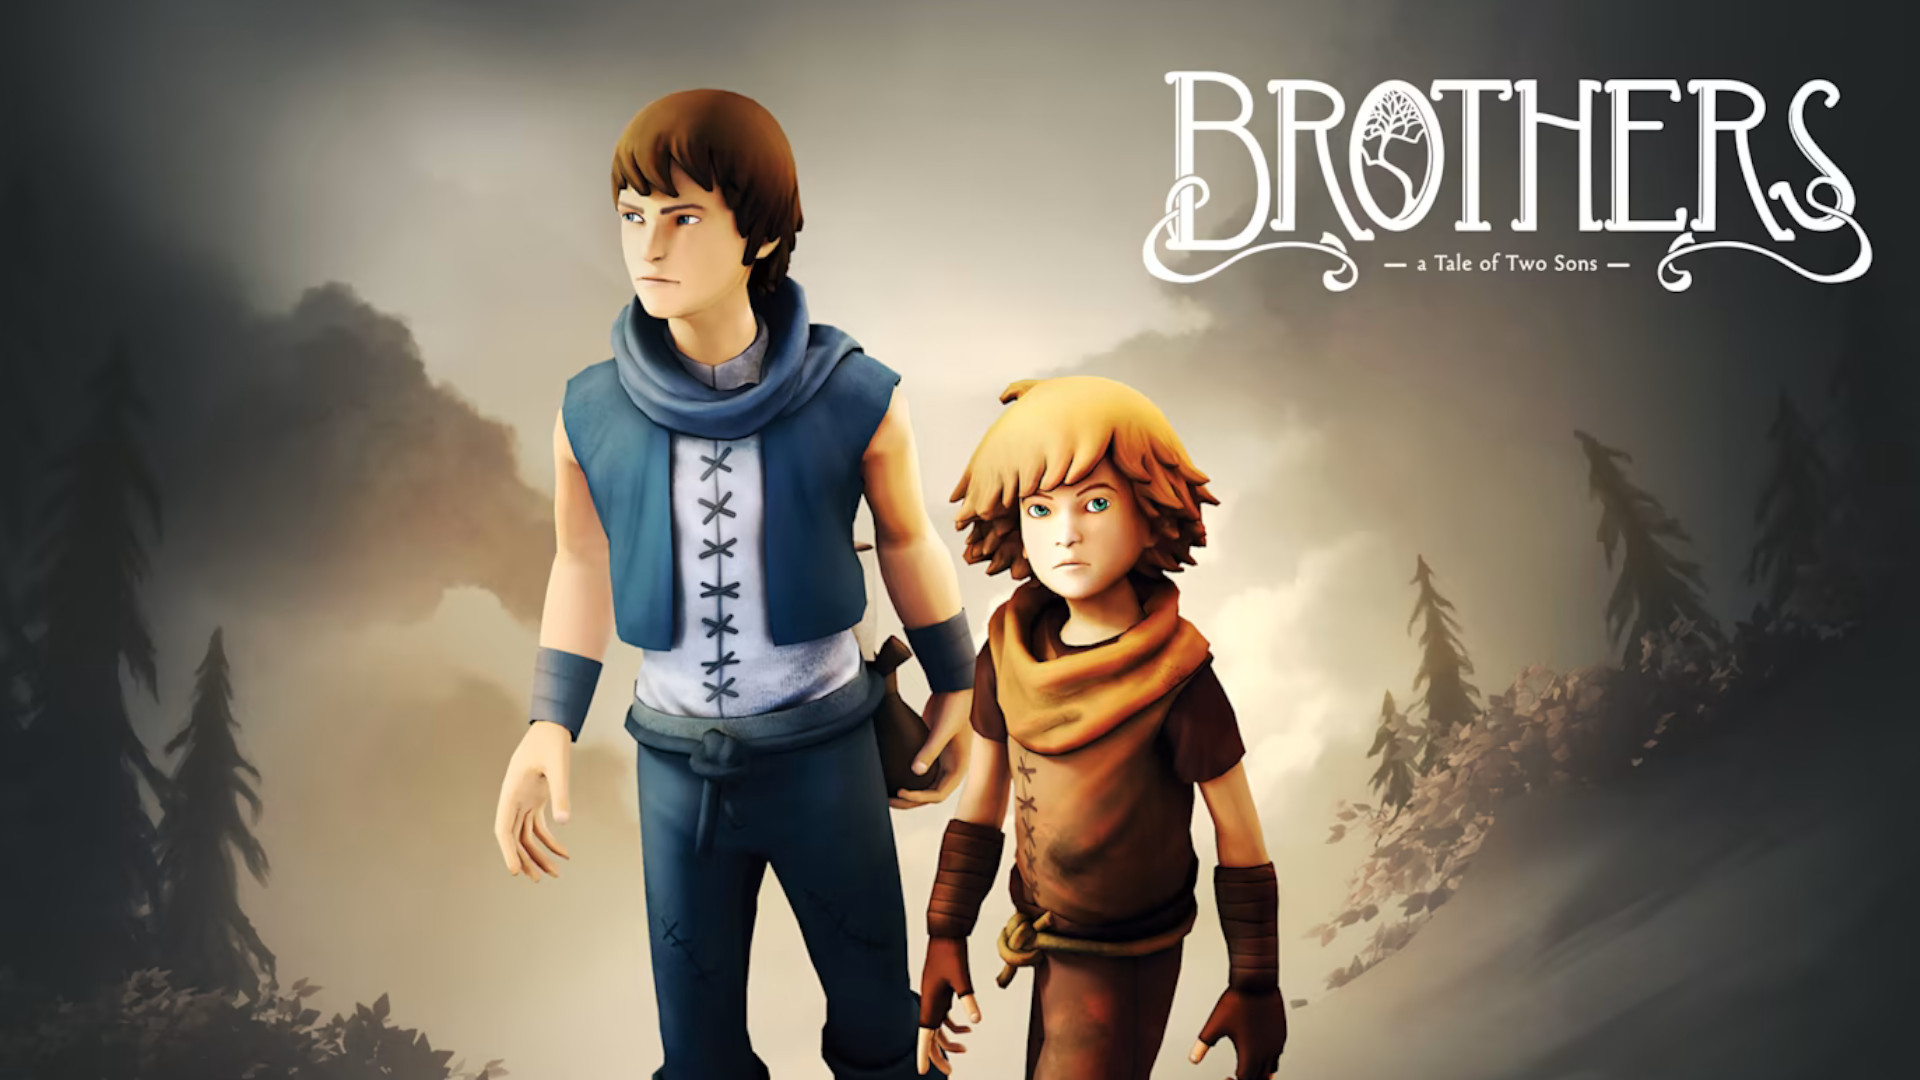 Brothers a tale of two sons cover art